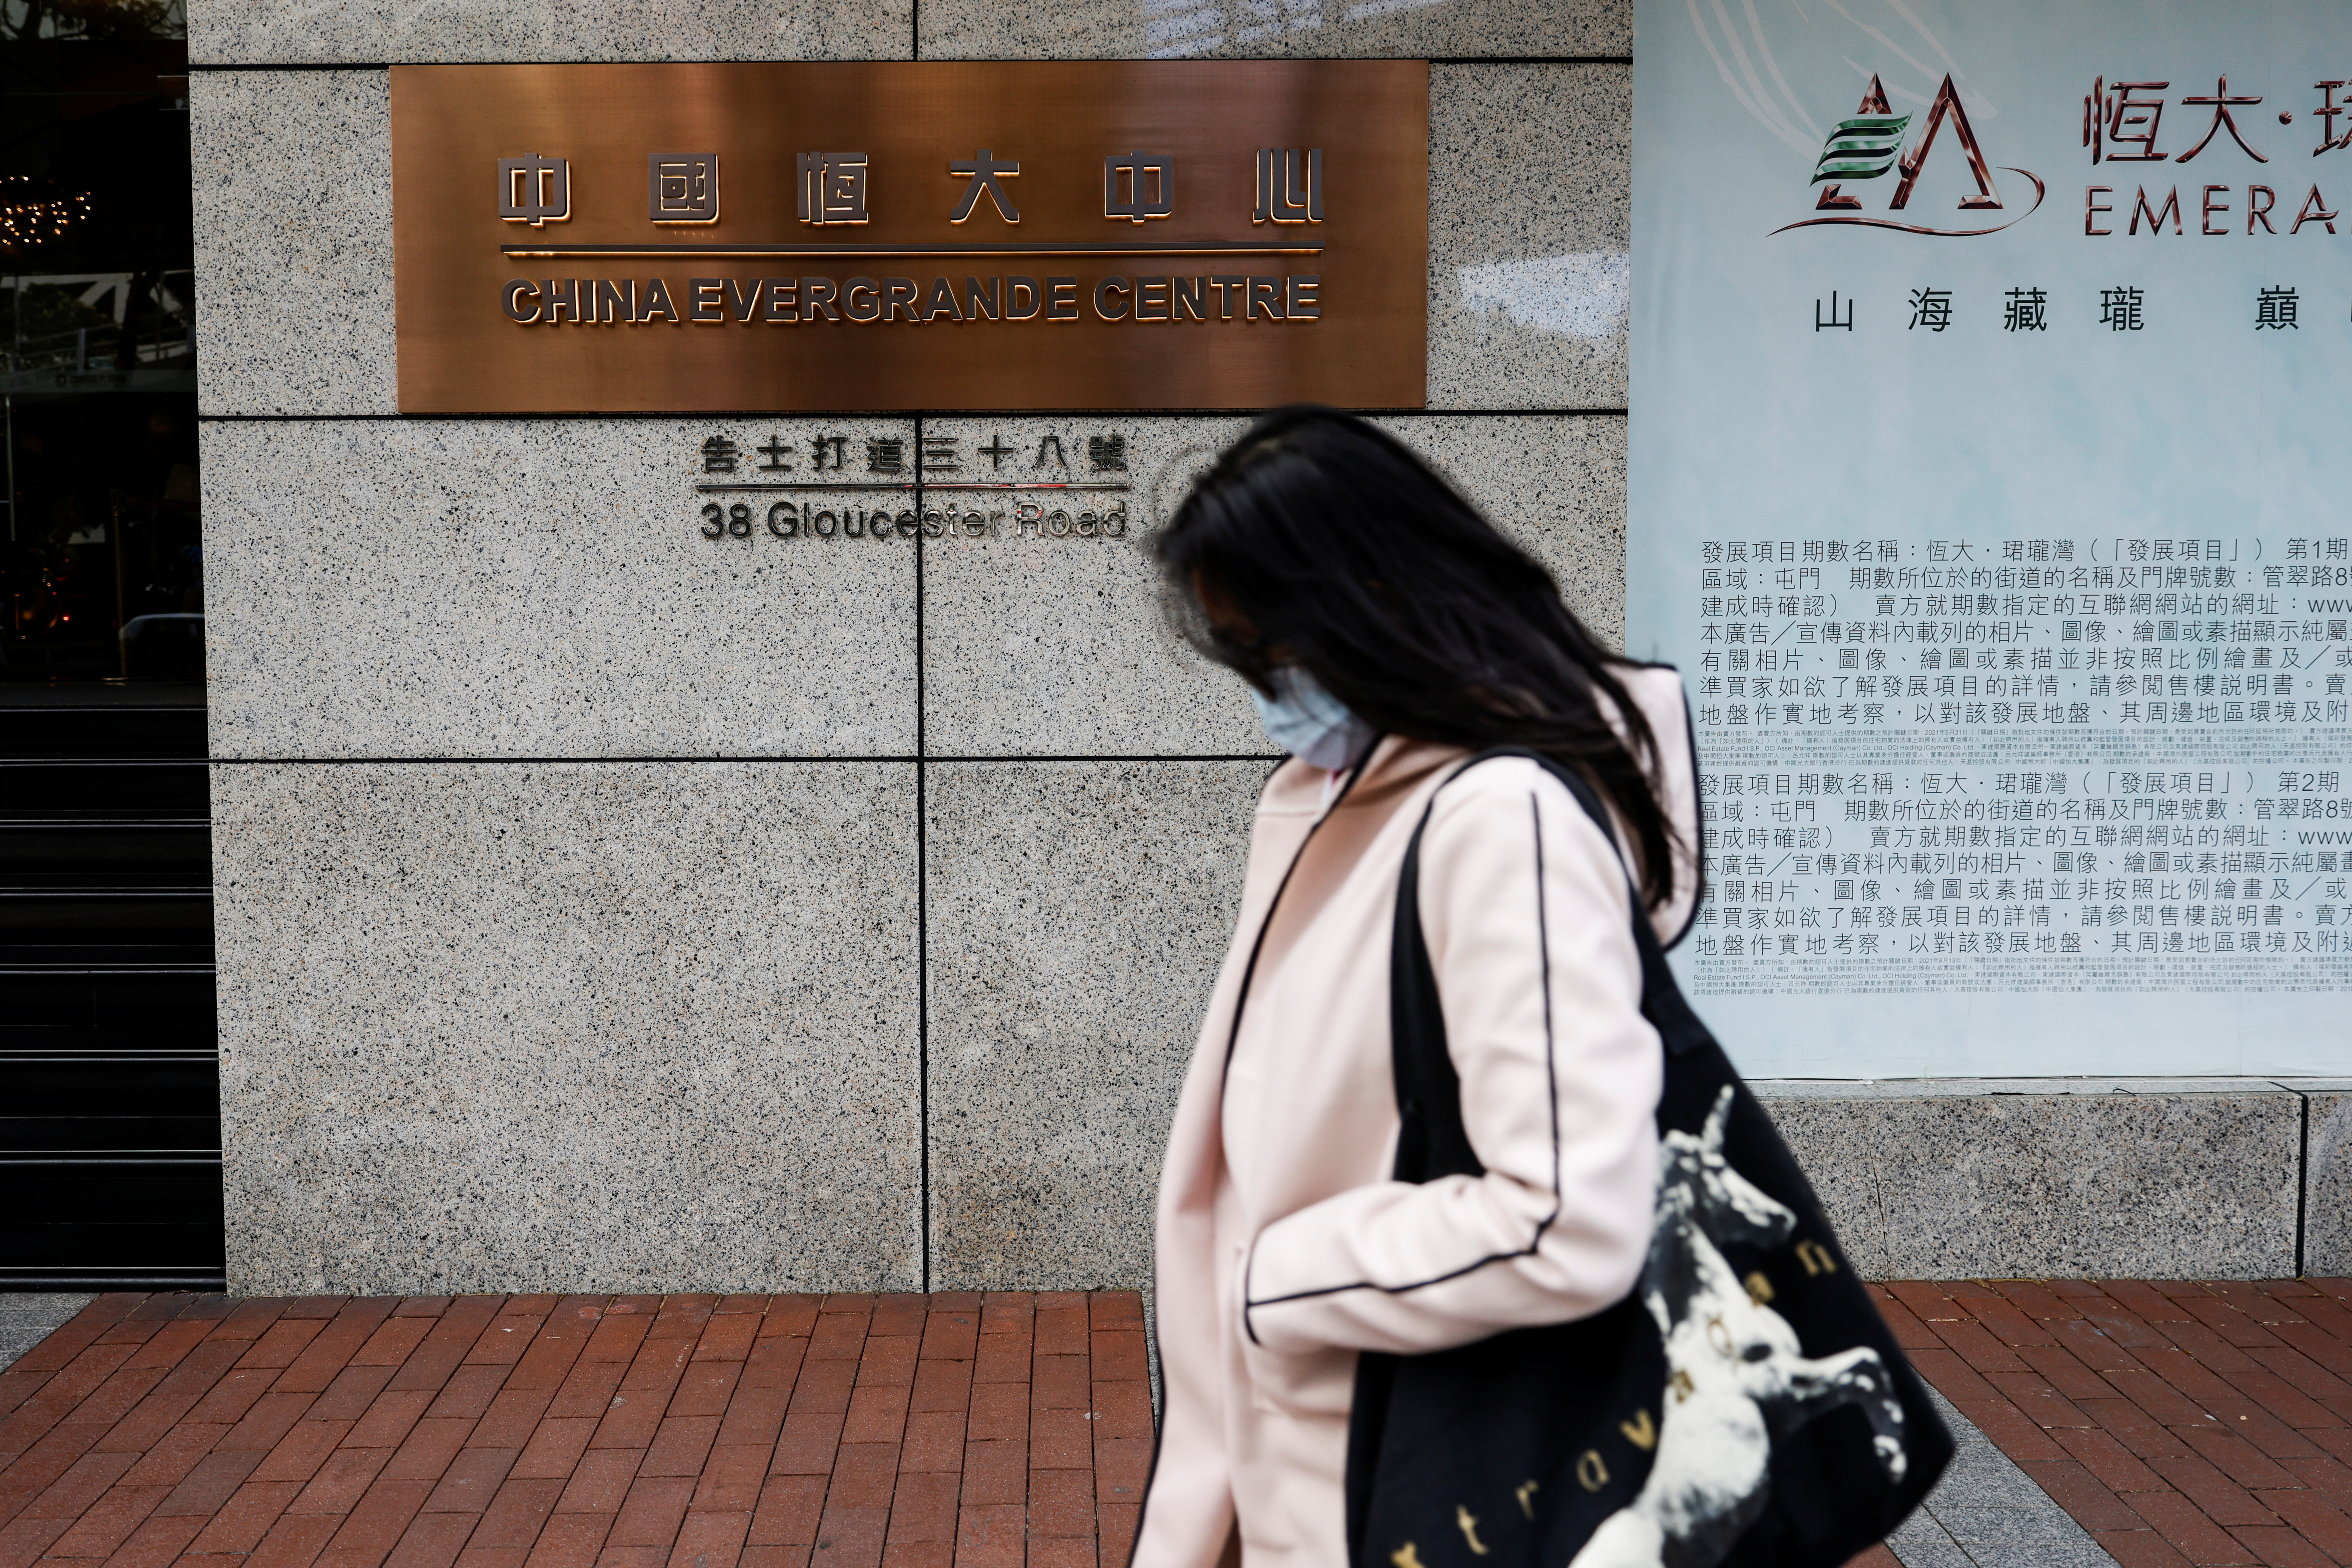 A woman walks in front of the China Evergrande Centre building sign in Hong Kong